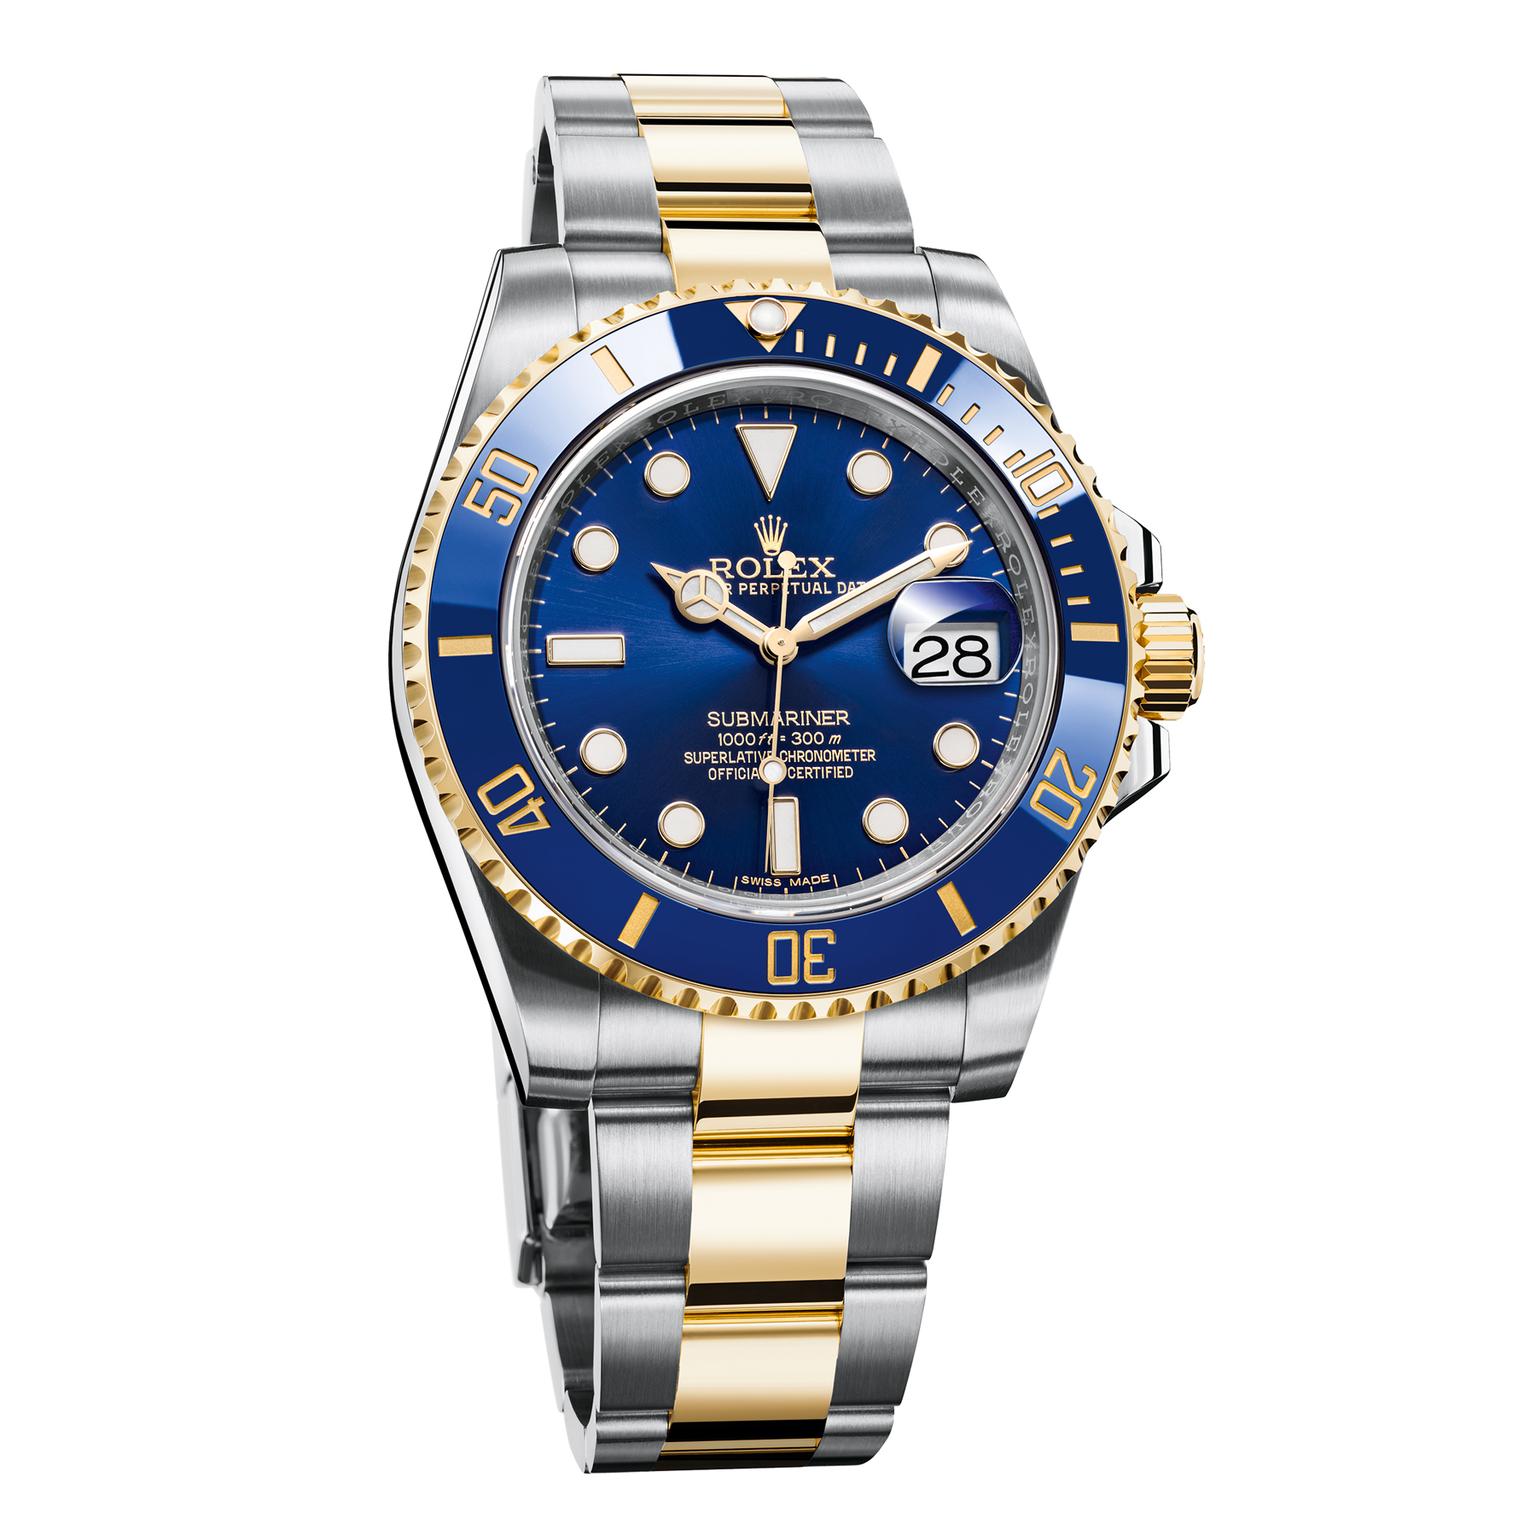 Oyster Perpetual Submariner Date watch, Rolex